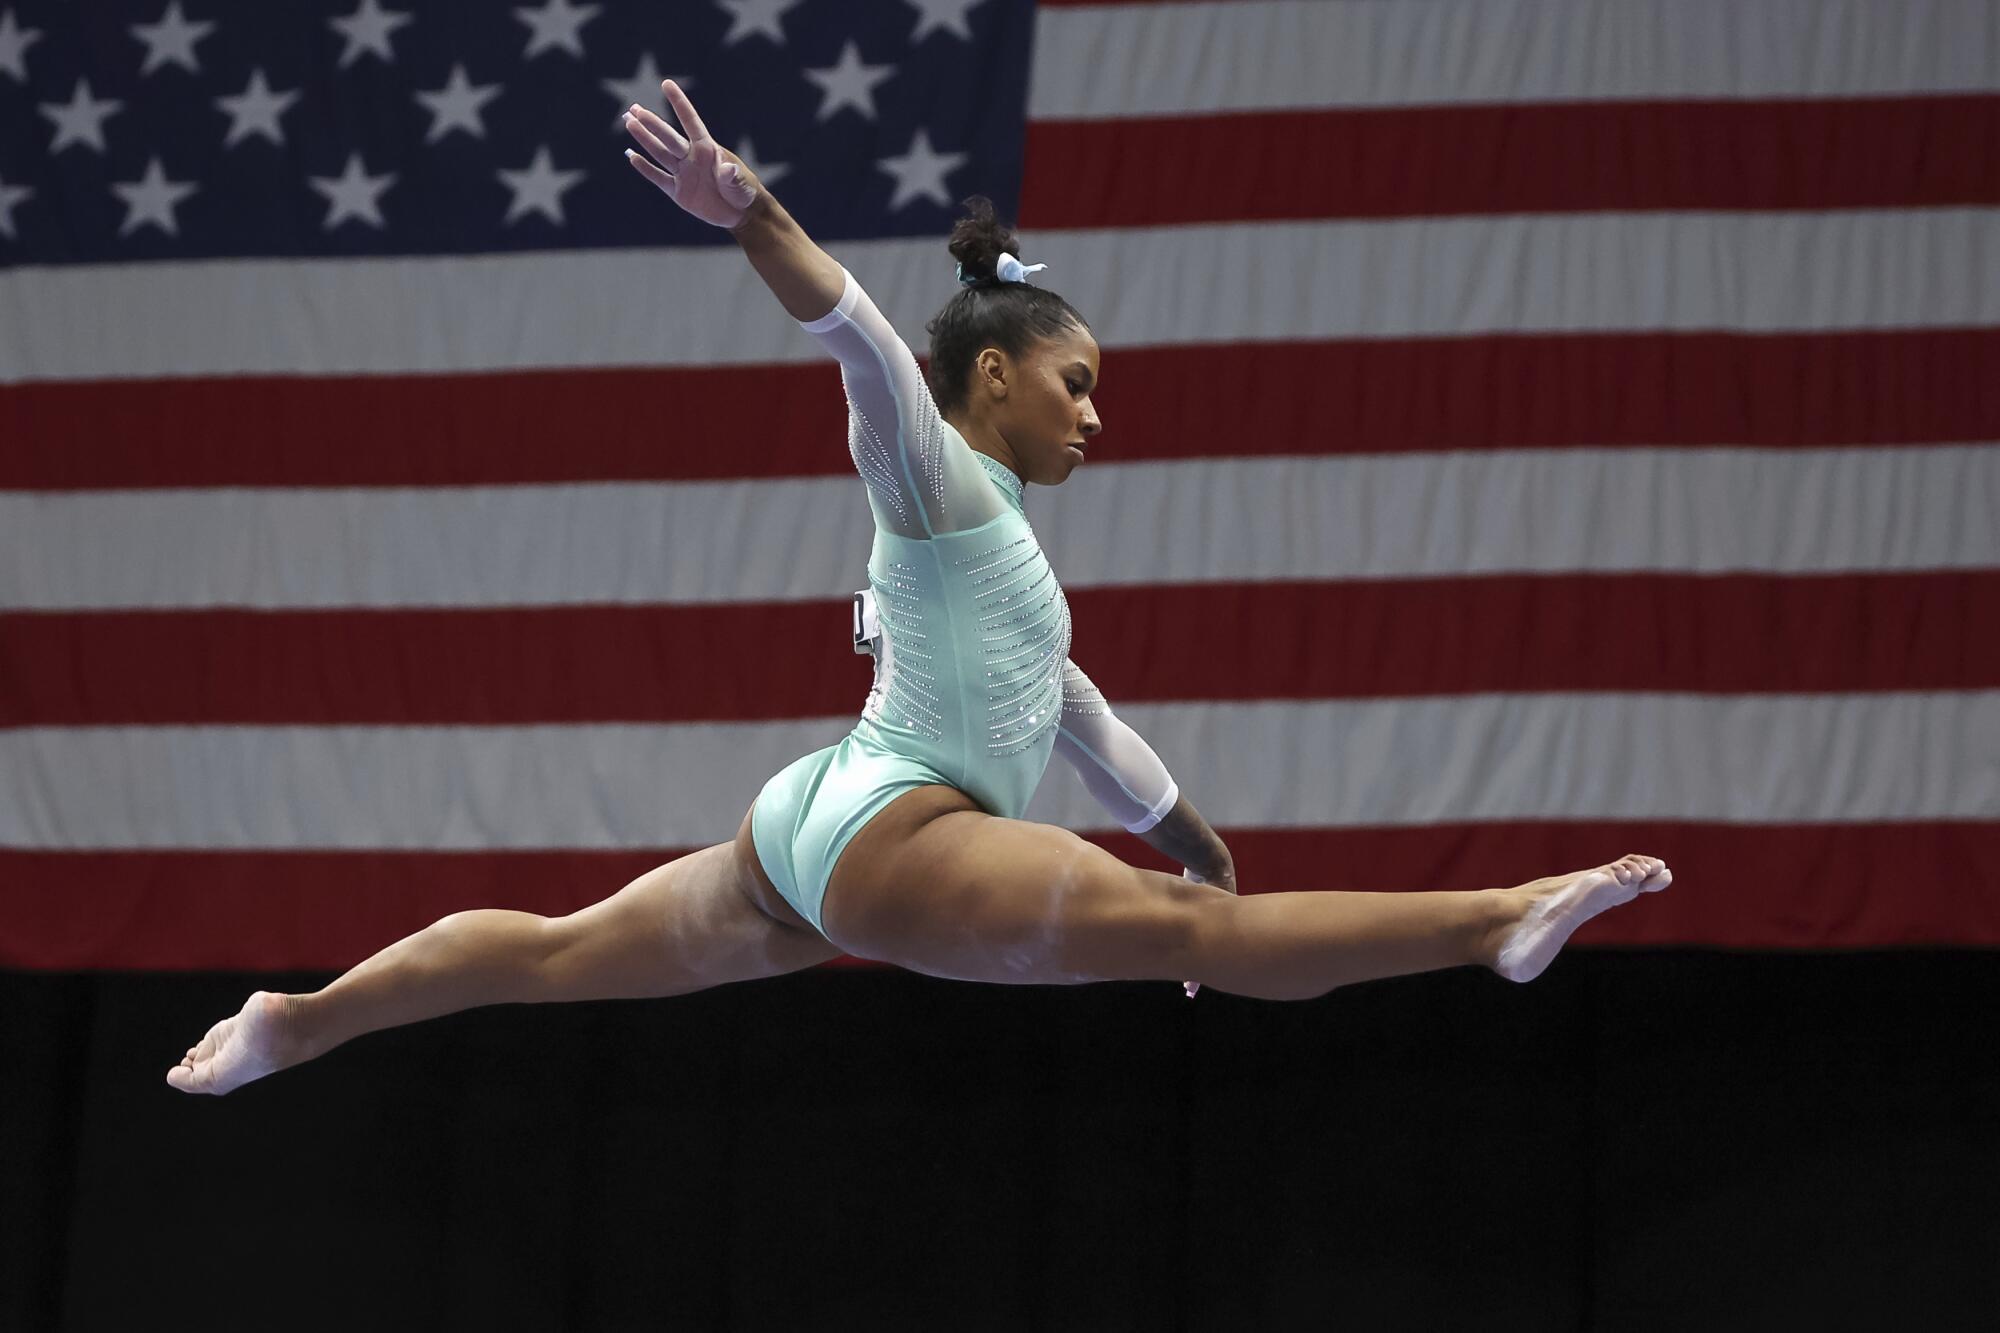 Jordan Chiles competes on the beam during the U.S. Gymnastics Championships in August.